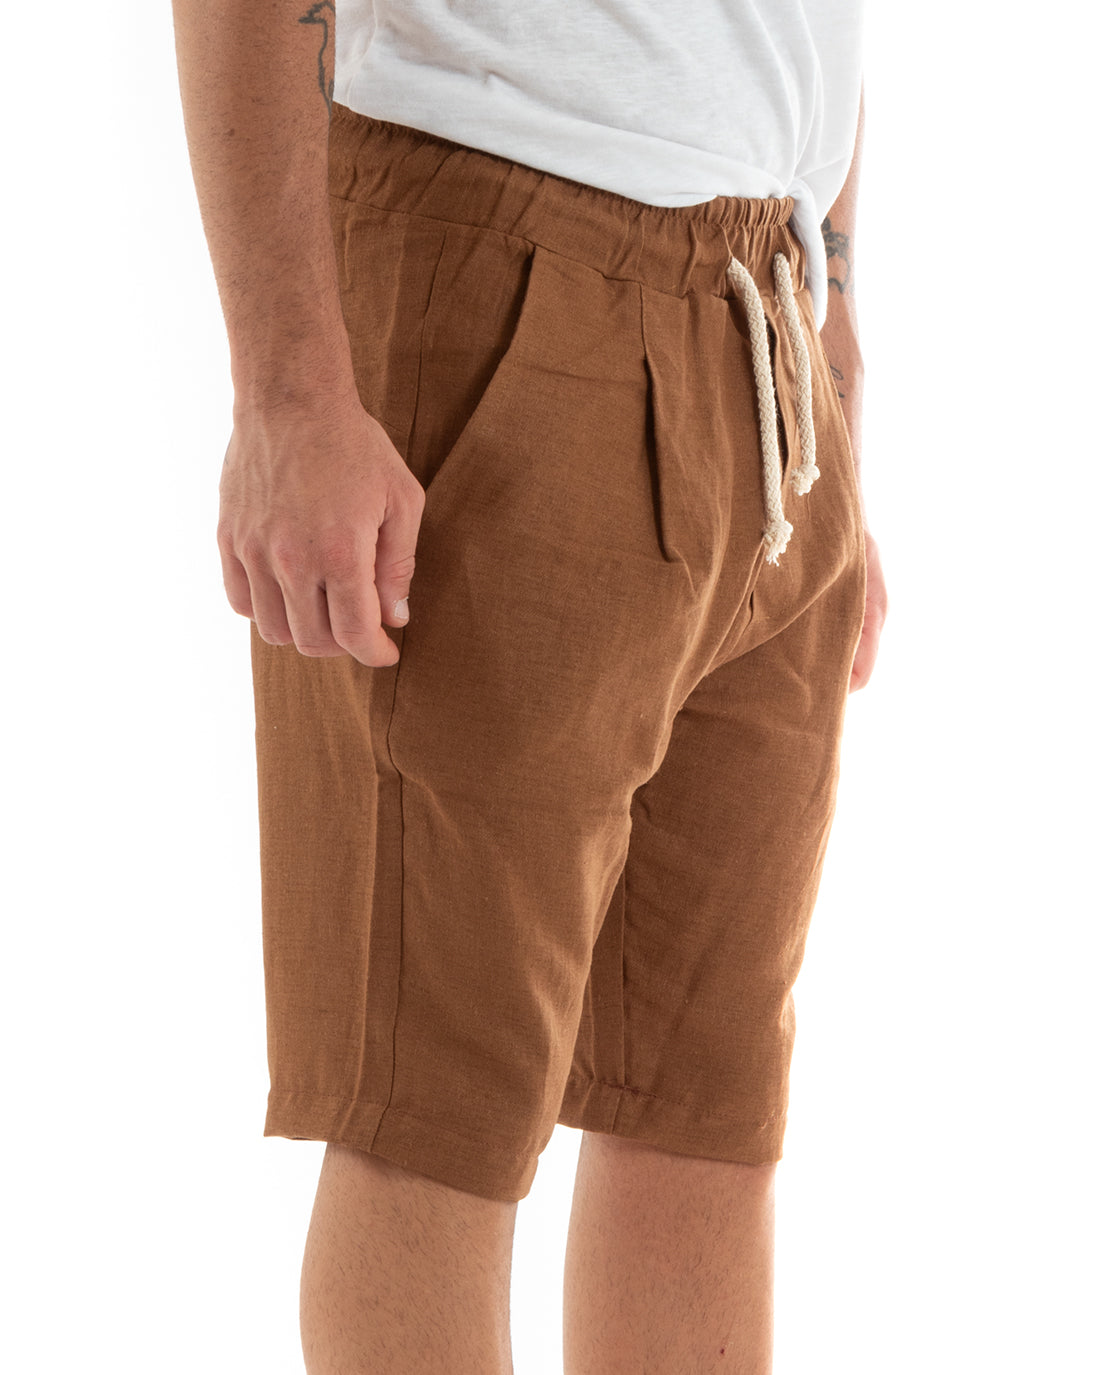 Bermuda Shorts Men's Linen Solid Color Basic White GIOSAL-PC1926A